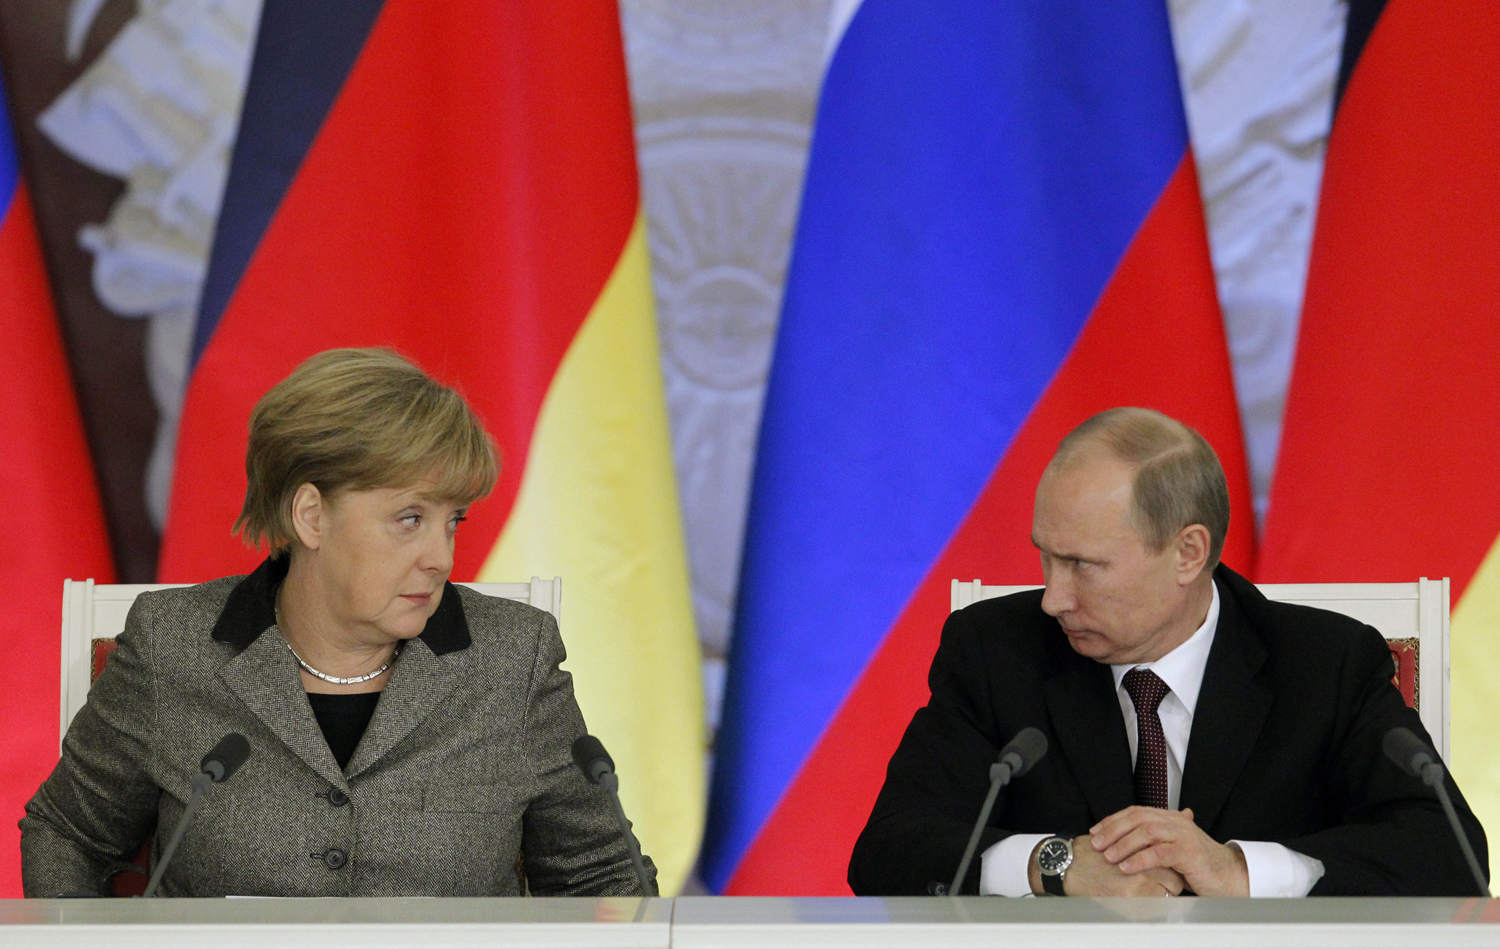 From left: German Chancellor Angela Merkel and Russian President Vladimir Putin answer journalists' questions during a joint news conference in Moscow's Kremlin Nov. 16, 2012. 